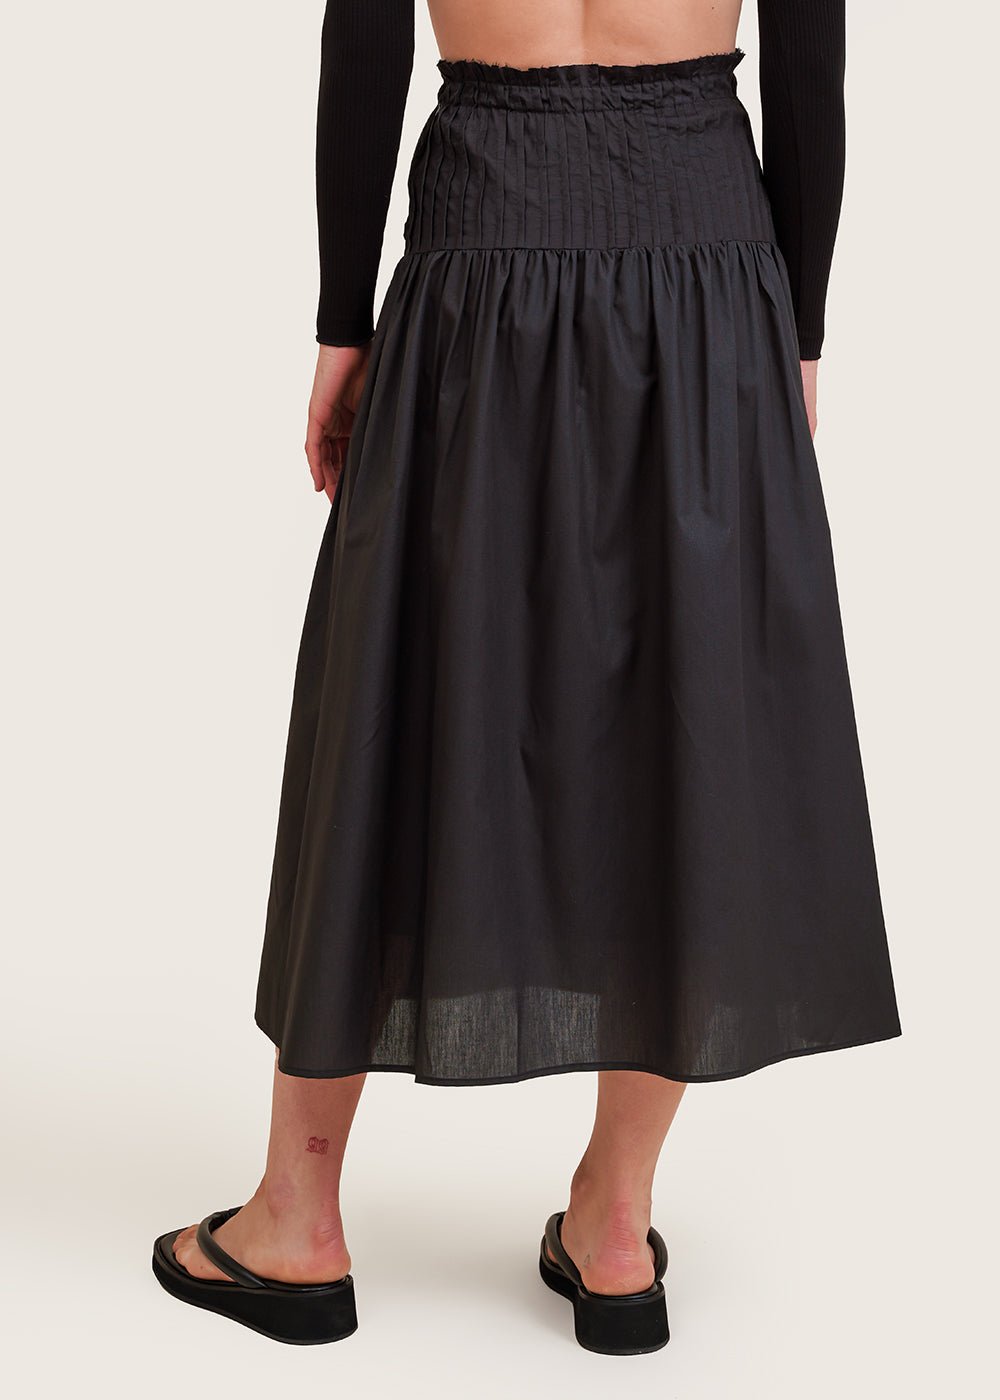 Angie Bauer Black Tucked Drop Waist Skirt - New Classics Studios Sustainable Ethical Fashion Canada